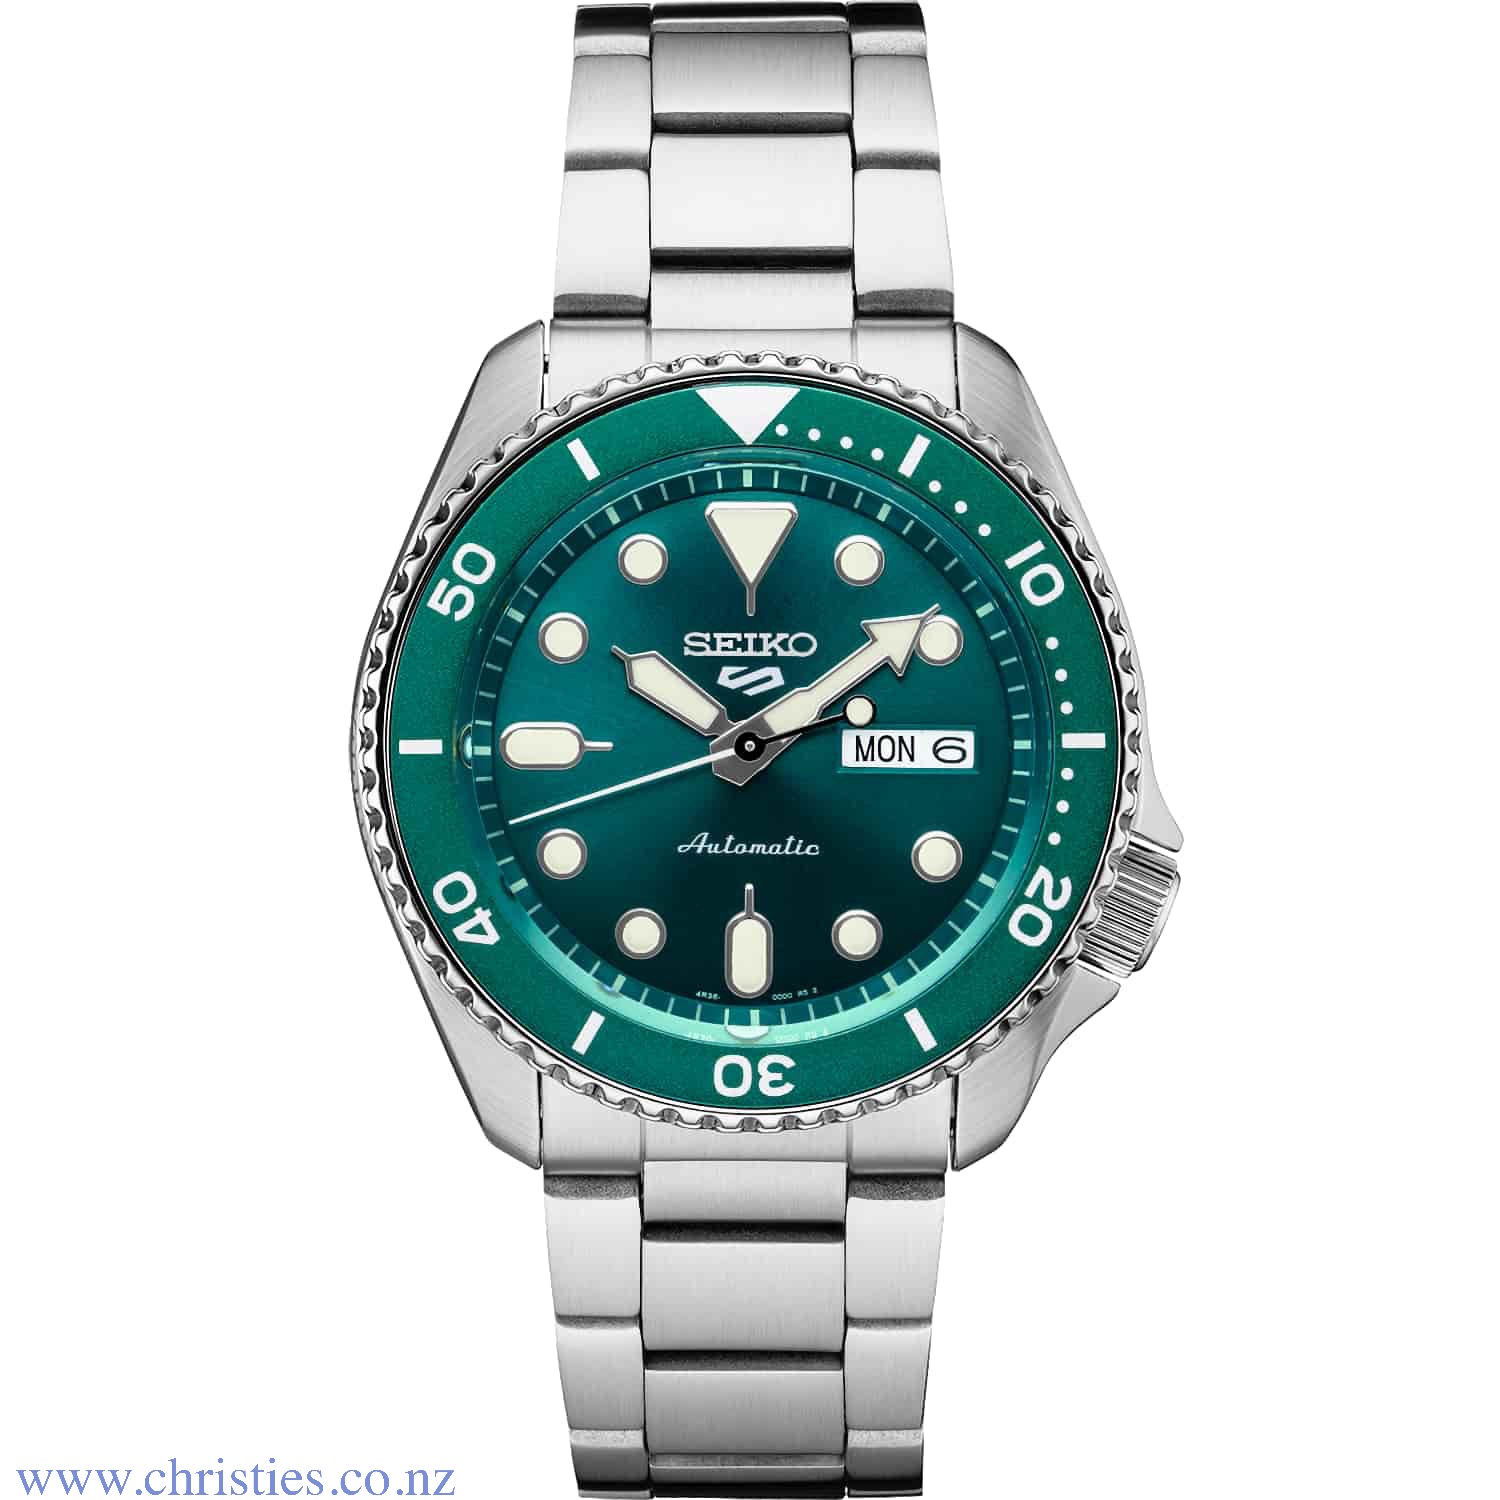 SRPD61K SEIKO 5 Automatic Sports Watch. SEIKOs iconic watch collection, the SEIKO 5 series was first introduced in 1963 and has been an integral part of the SEIKO watch family ever since. 2019 sees the SEIKO 5 series take on a new modern look, and a new S